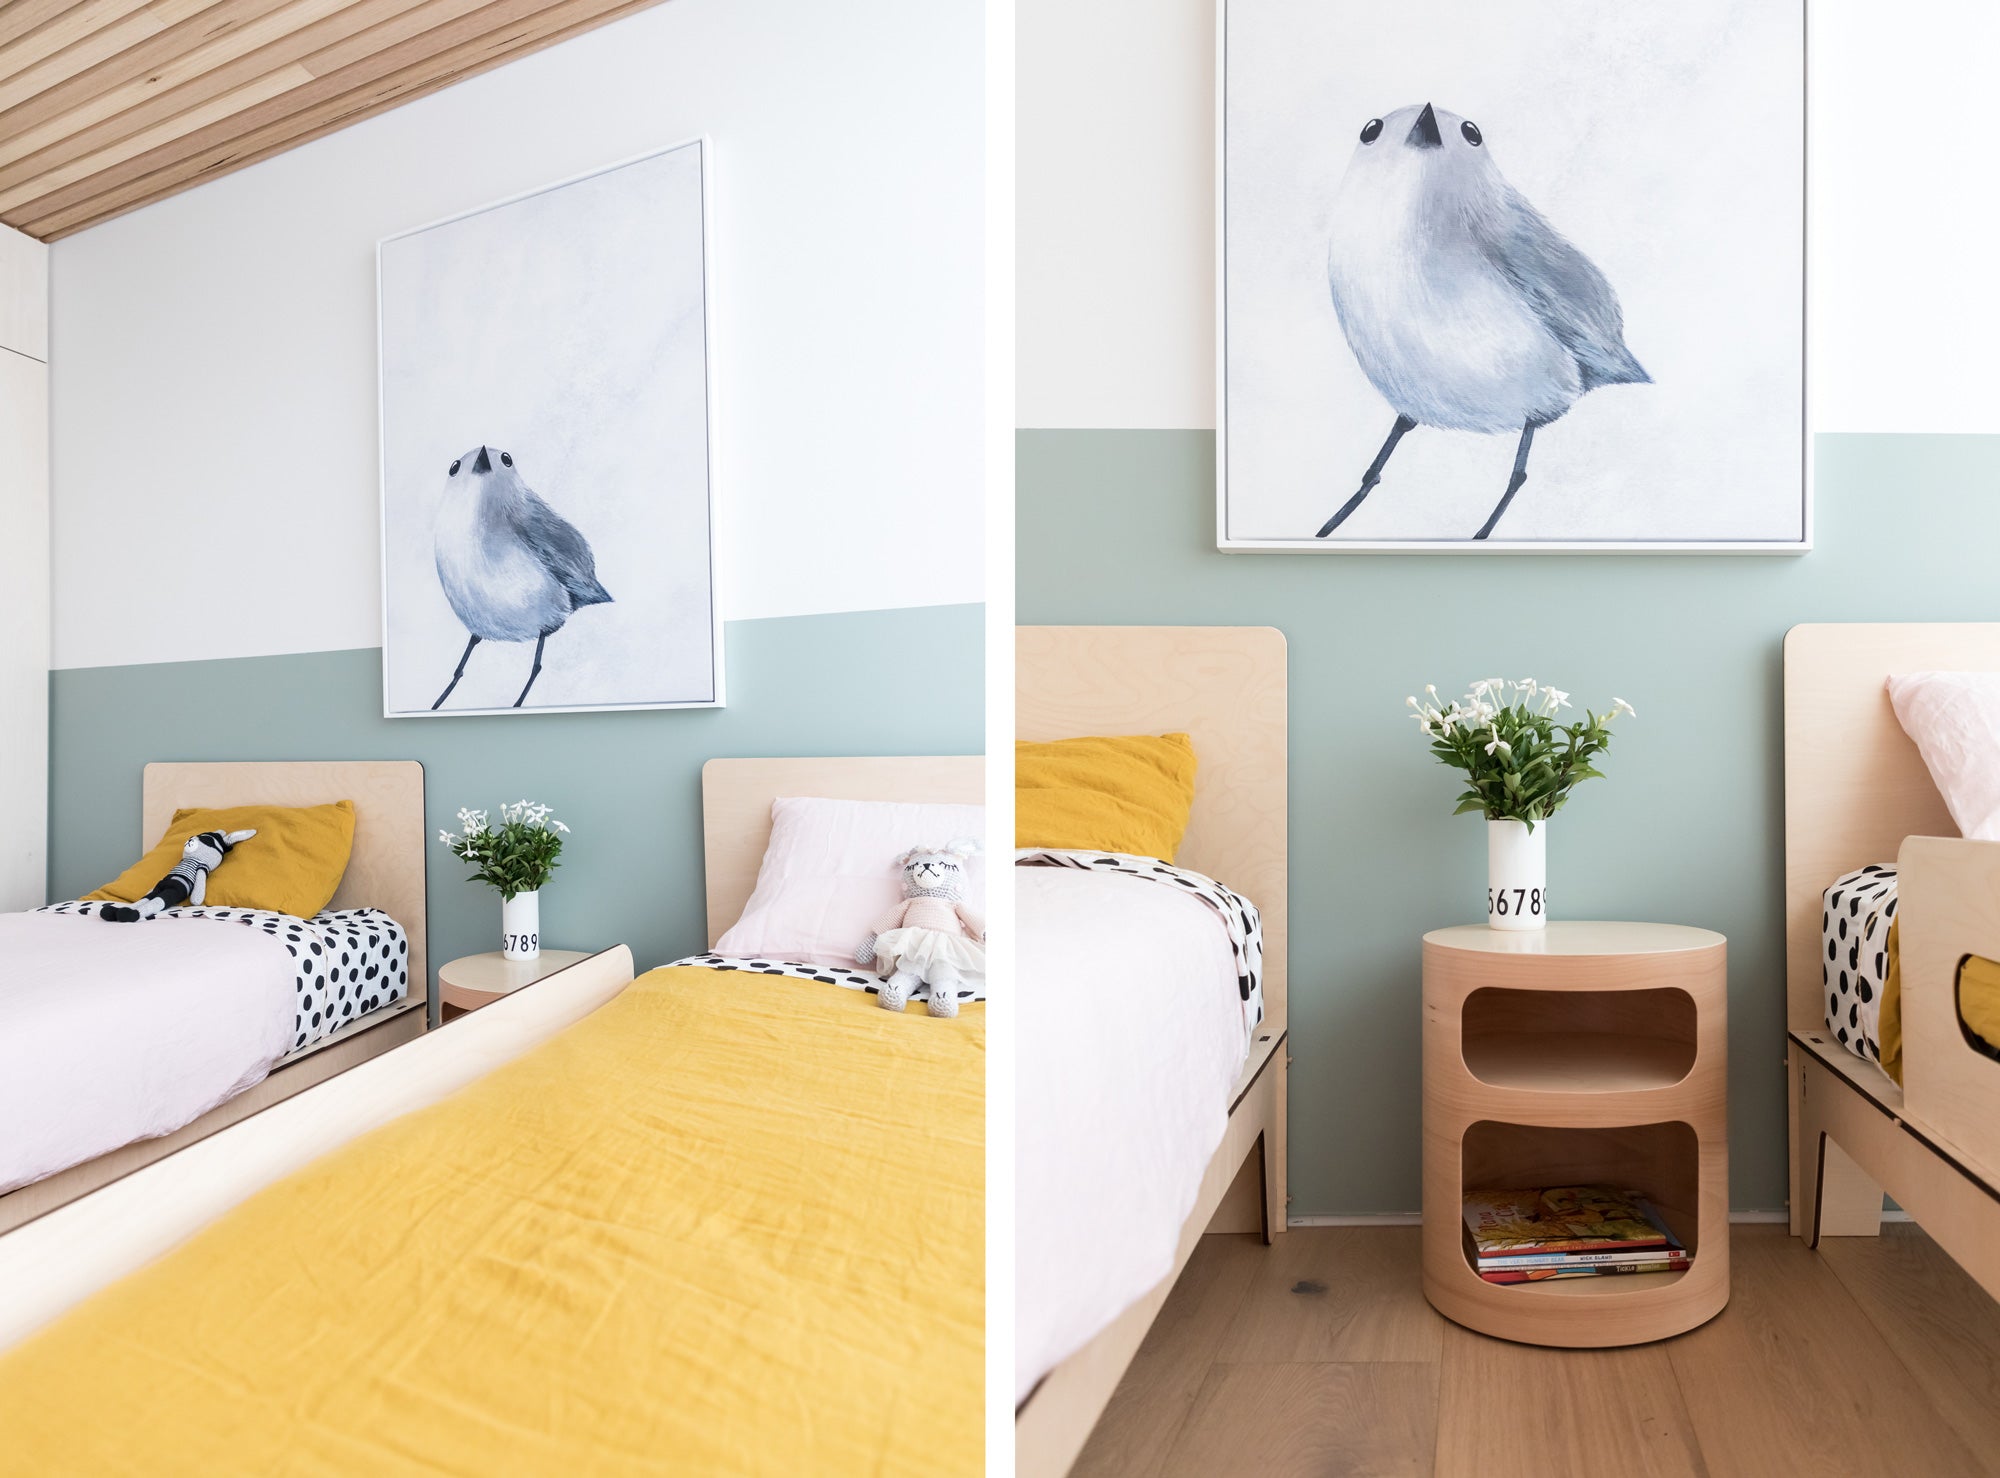 Image of a Children's Bedroom design by Hide and Sleep featuring the Singolo Single Bed